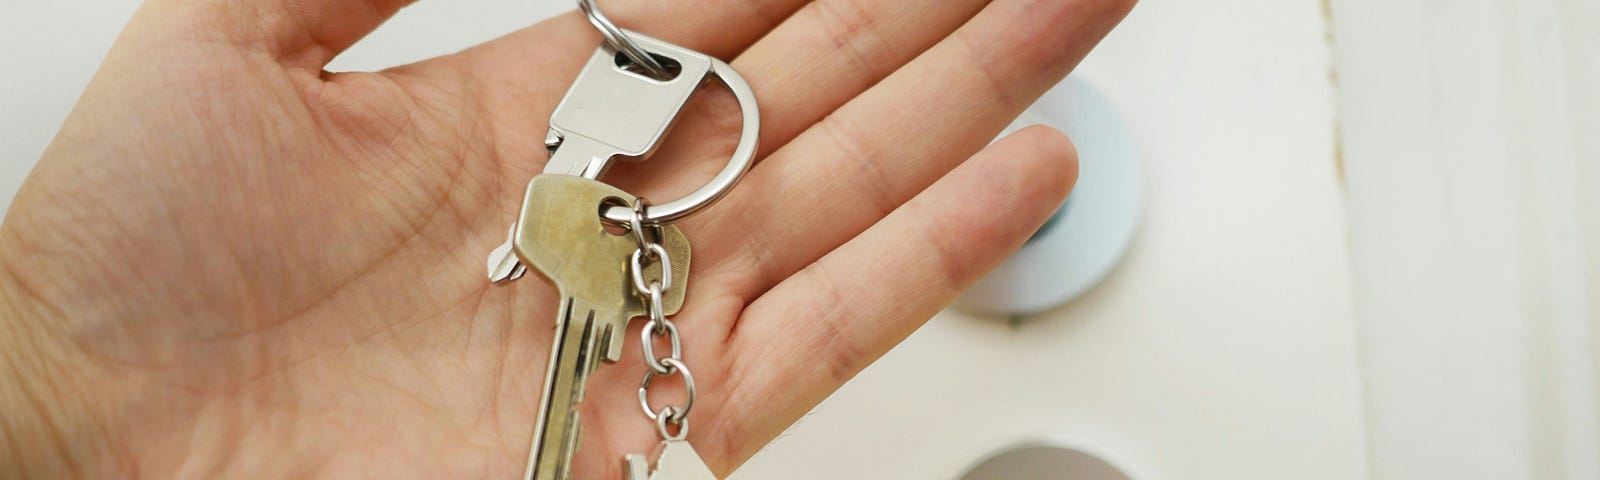 A hand holding keys in front of a locked door